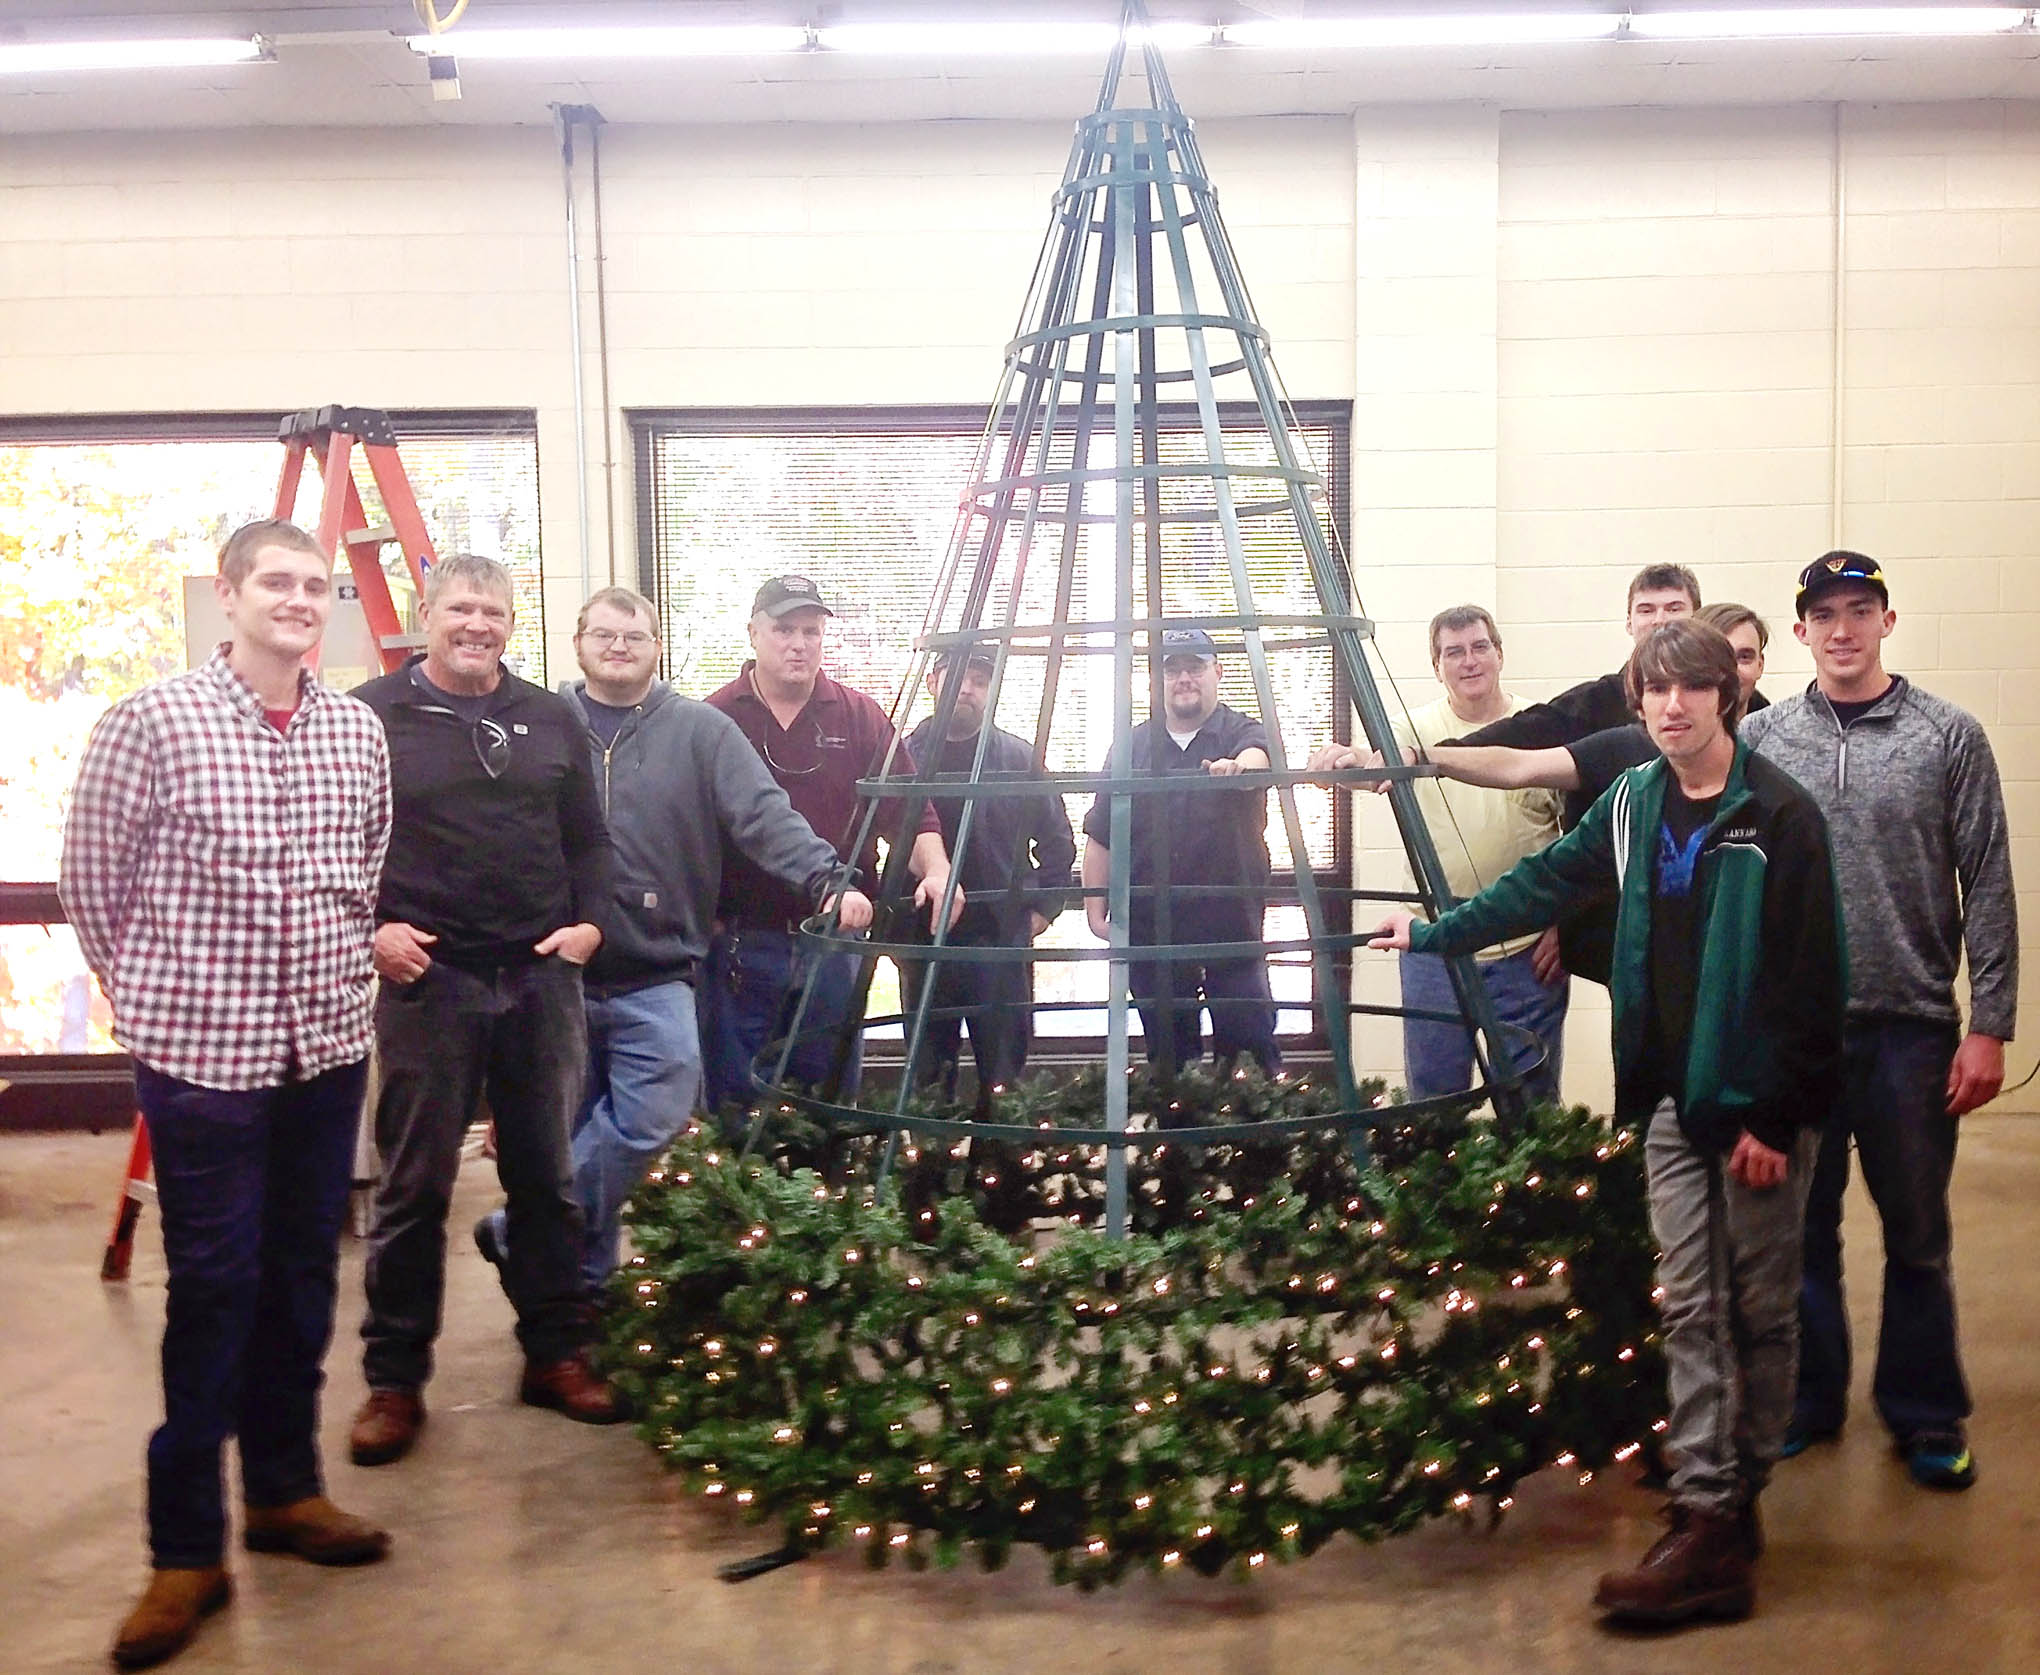 Read the full story, CCCC Christmas tree distinctive to college